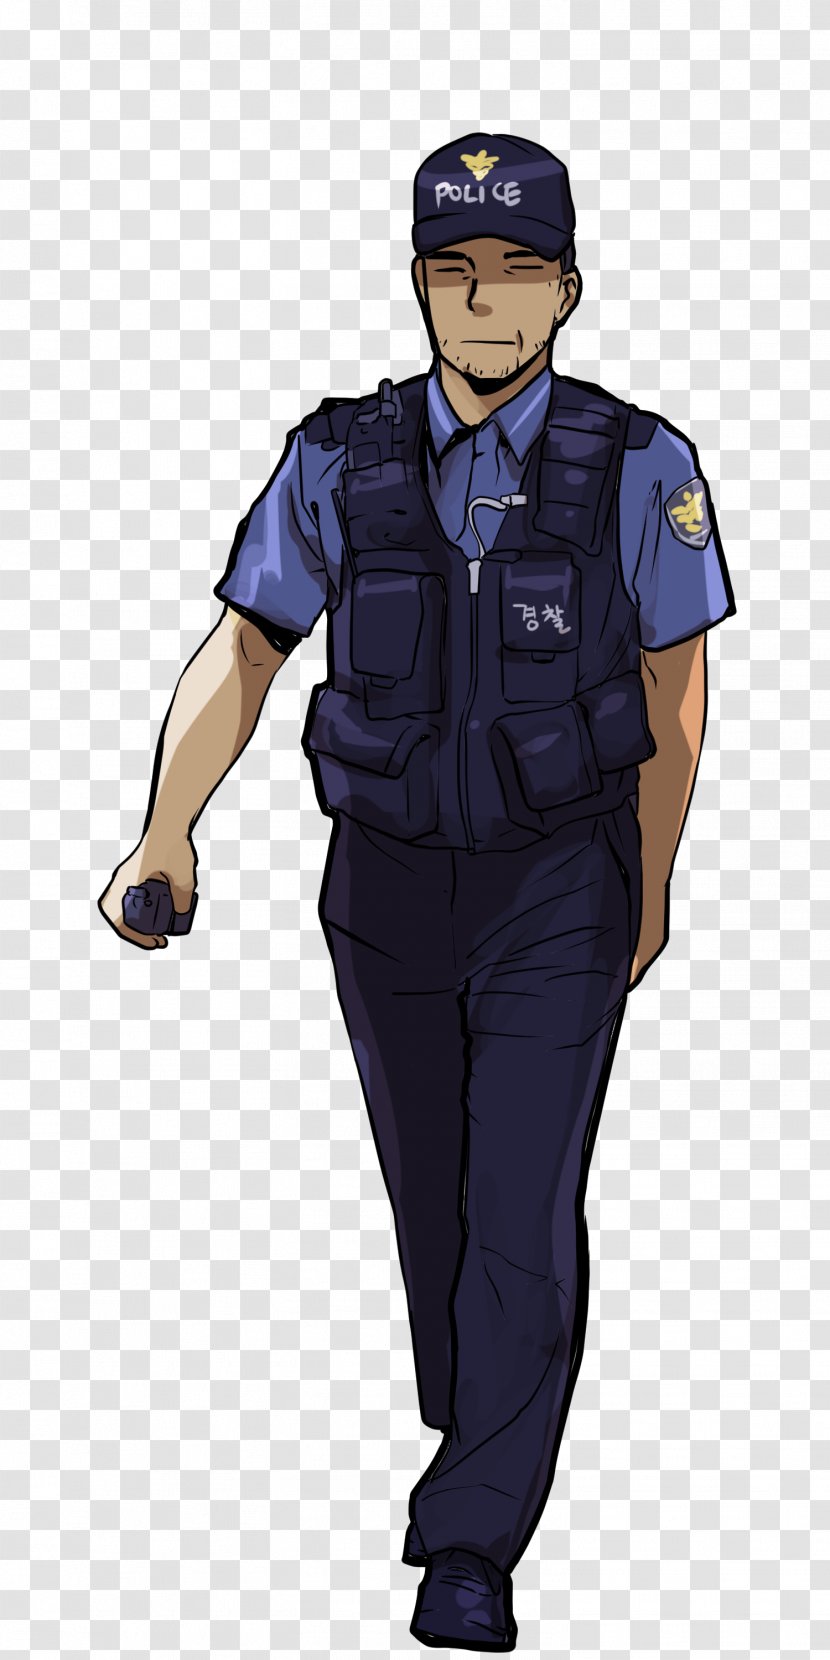 Police Officer Military Uniform Security - Electric Blue Transparent PNG